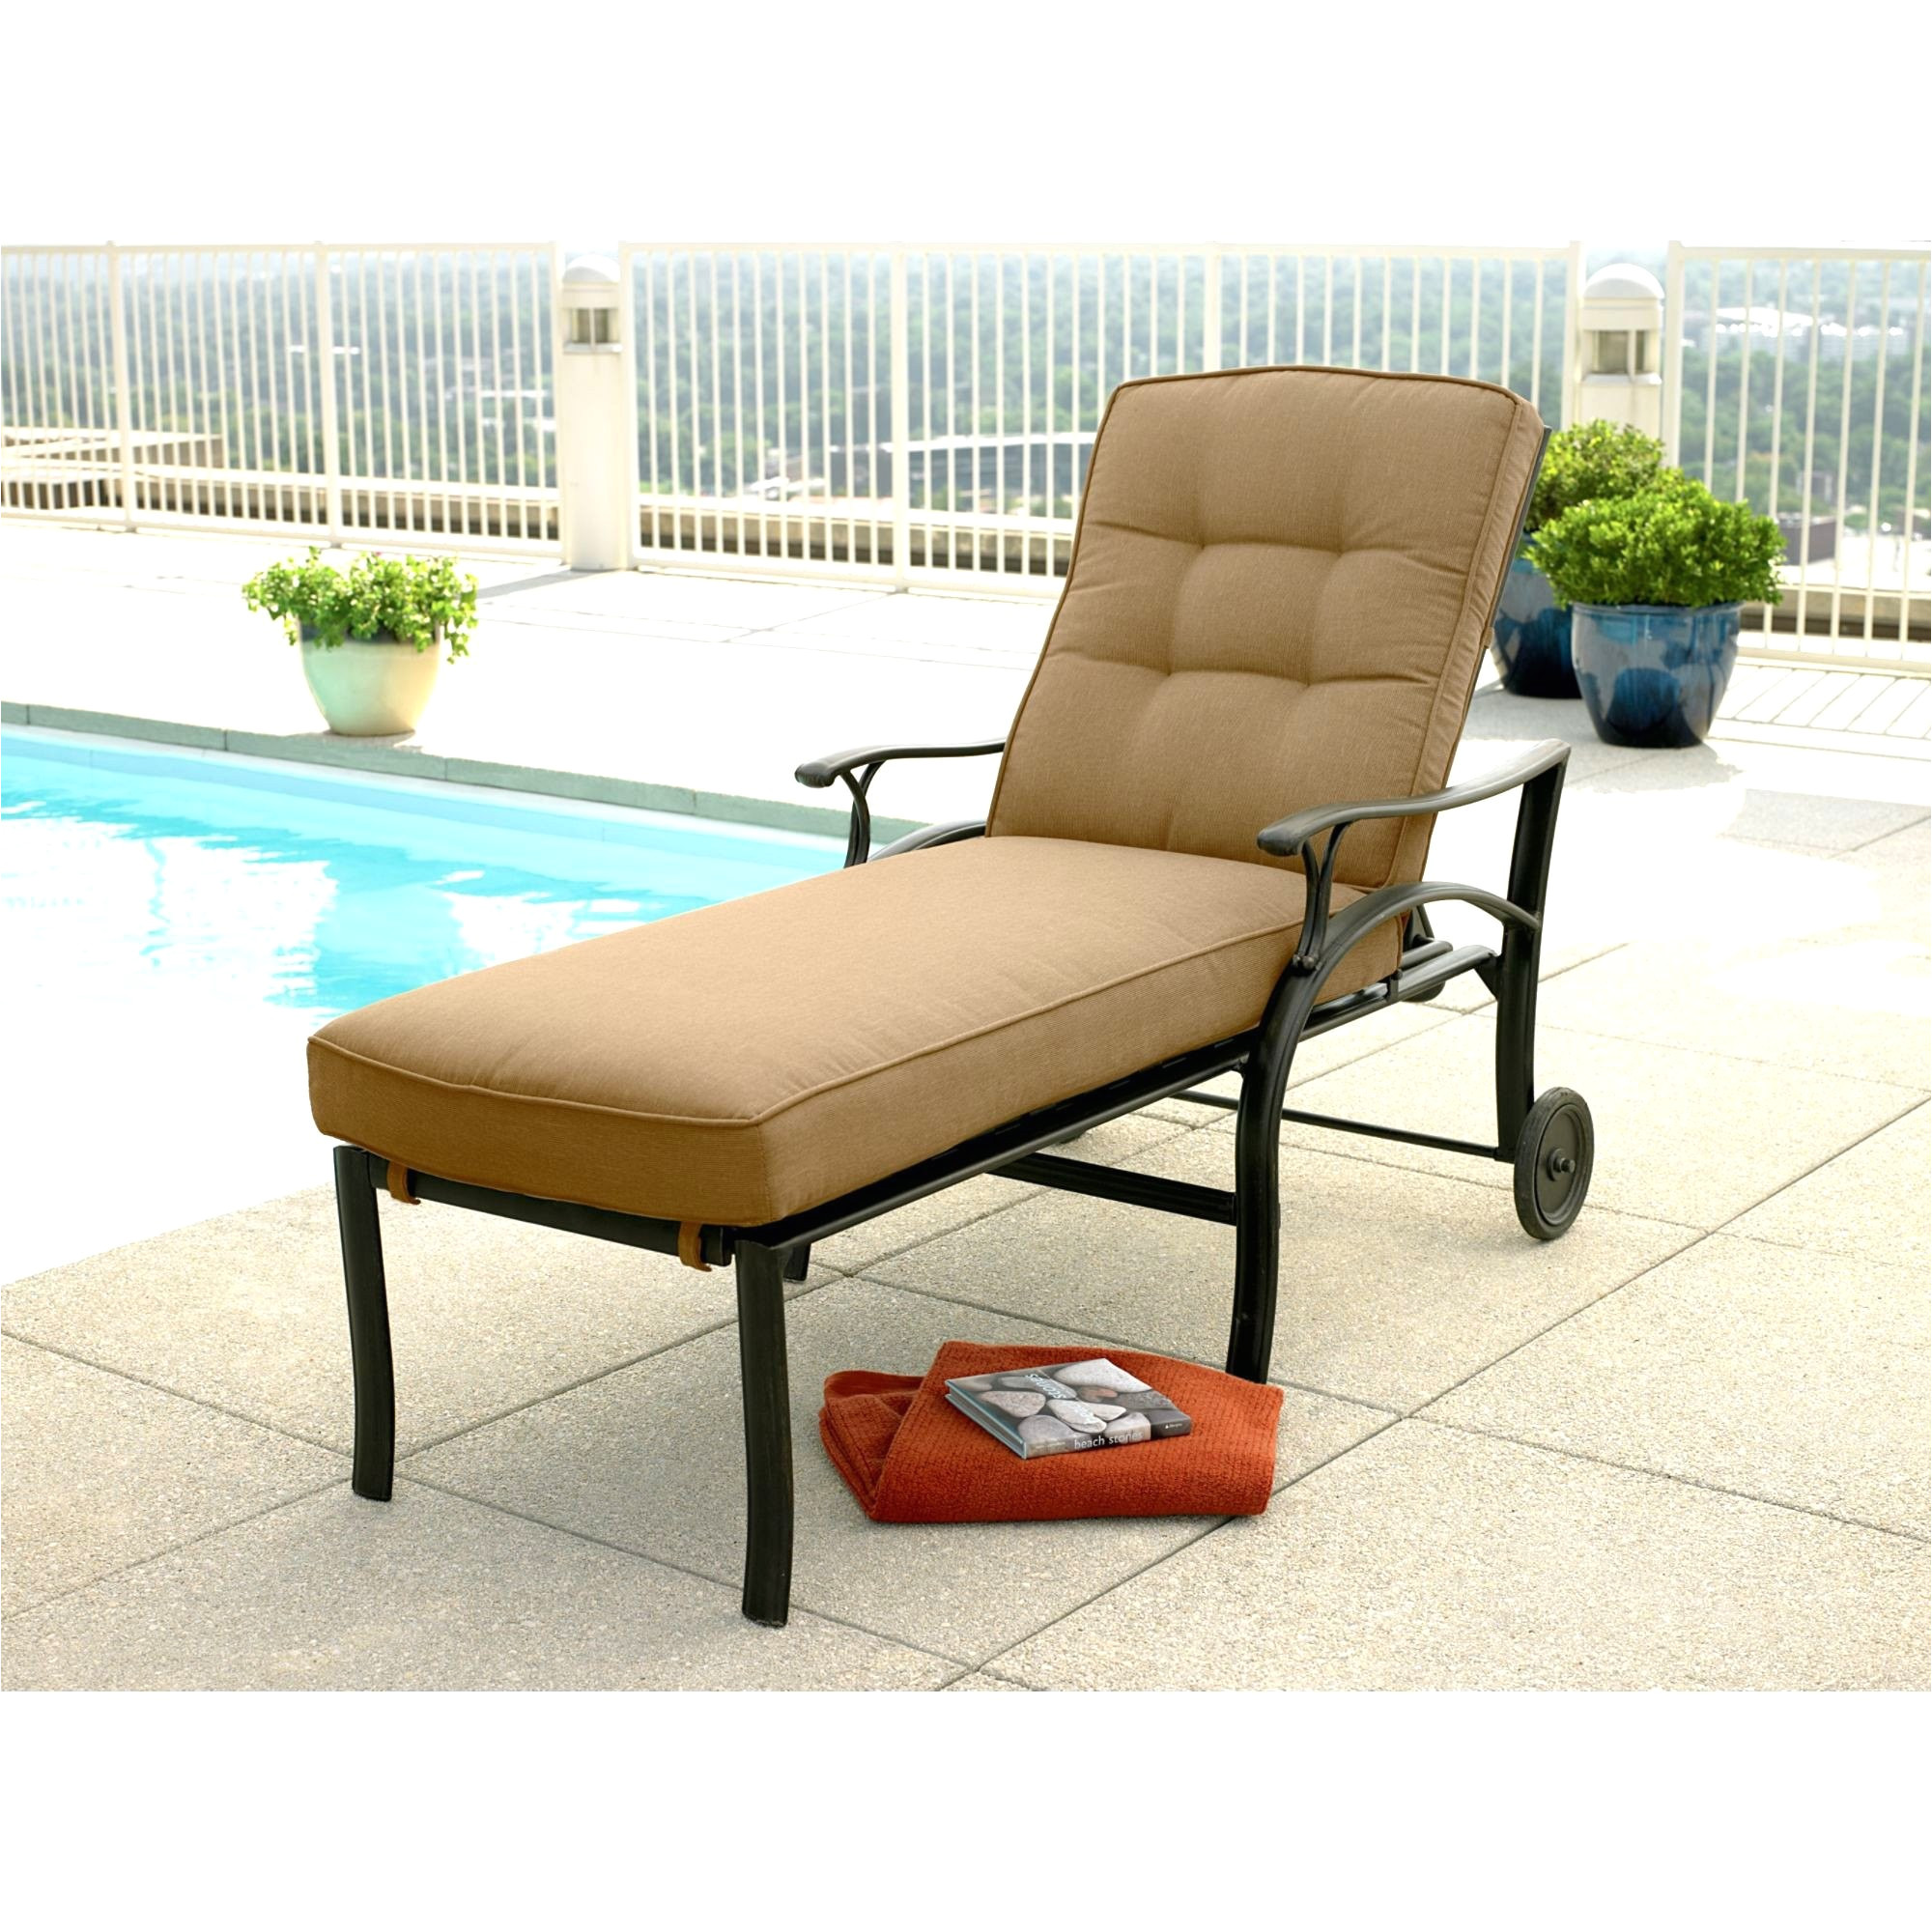 chaise lounge cushions canada unique 30 amazing replacement cushions for walmart outdoor furniture ideas